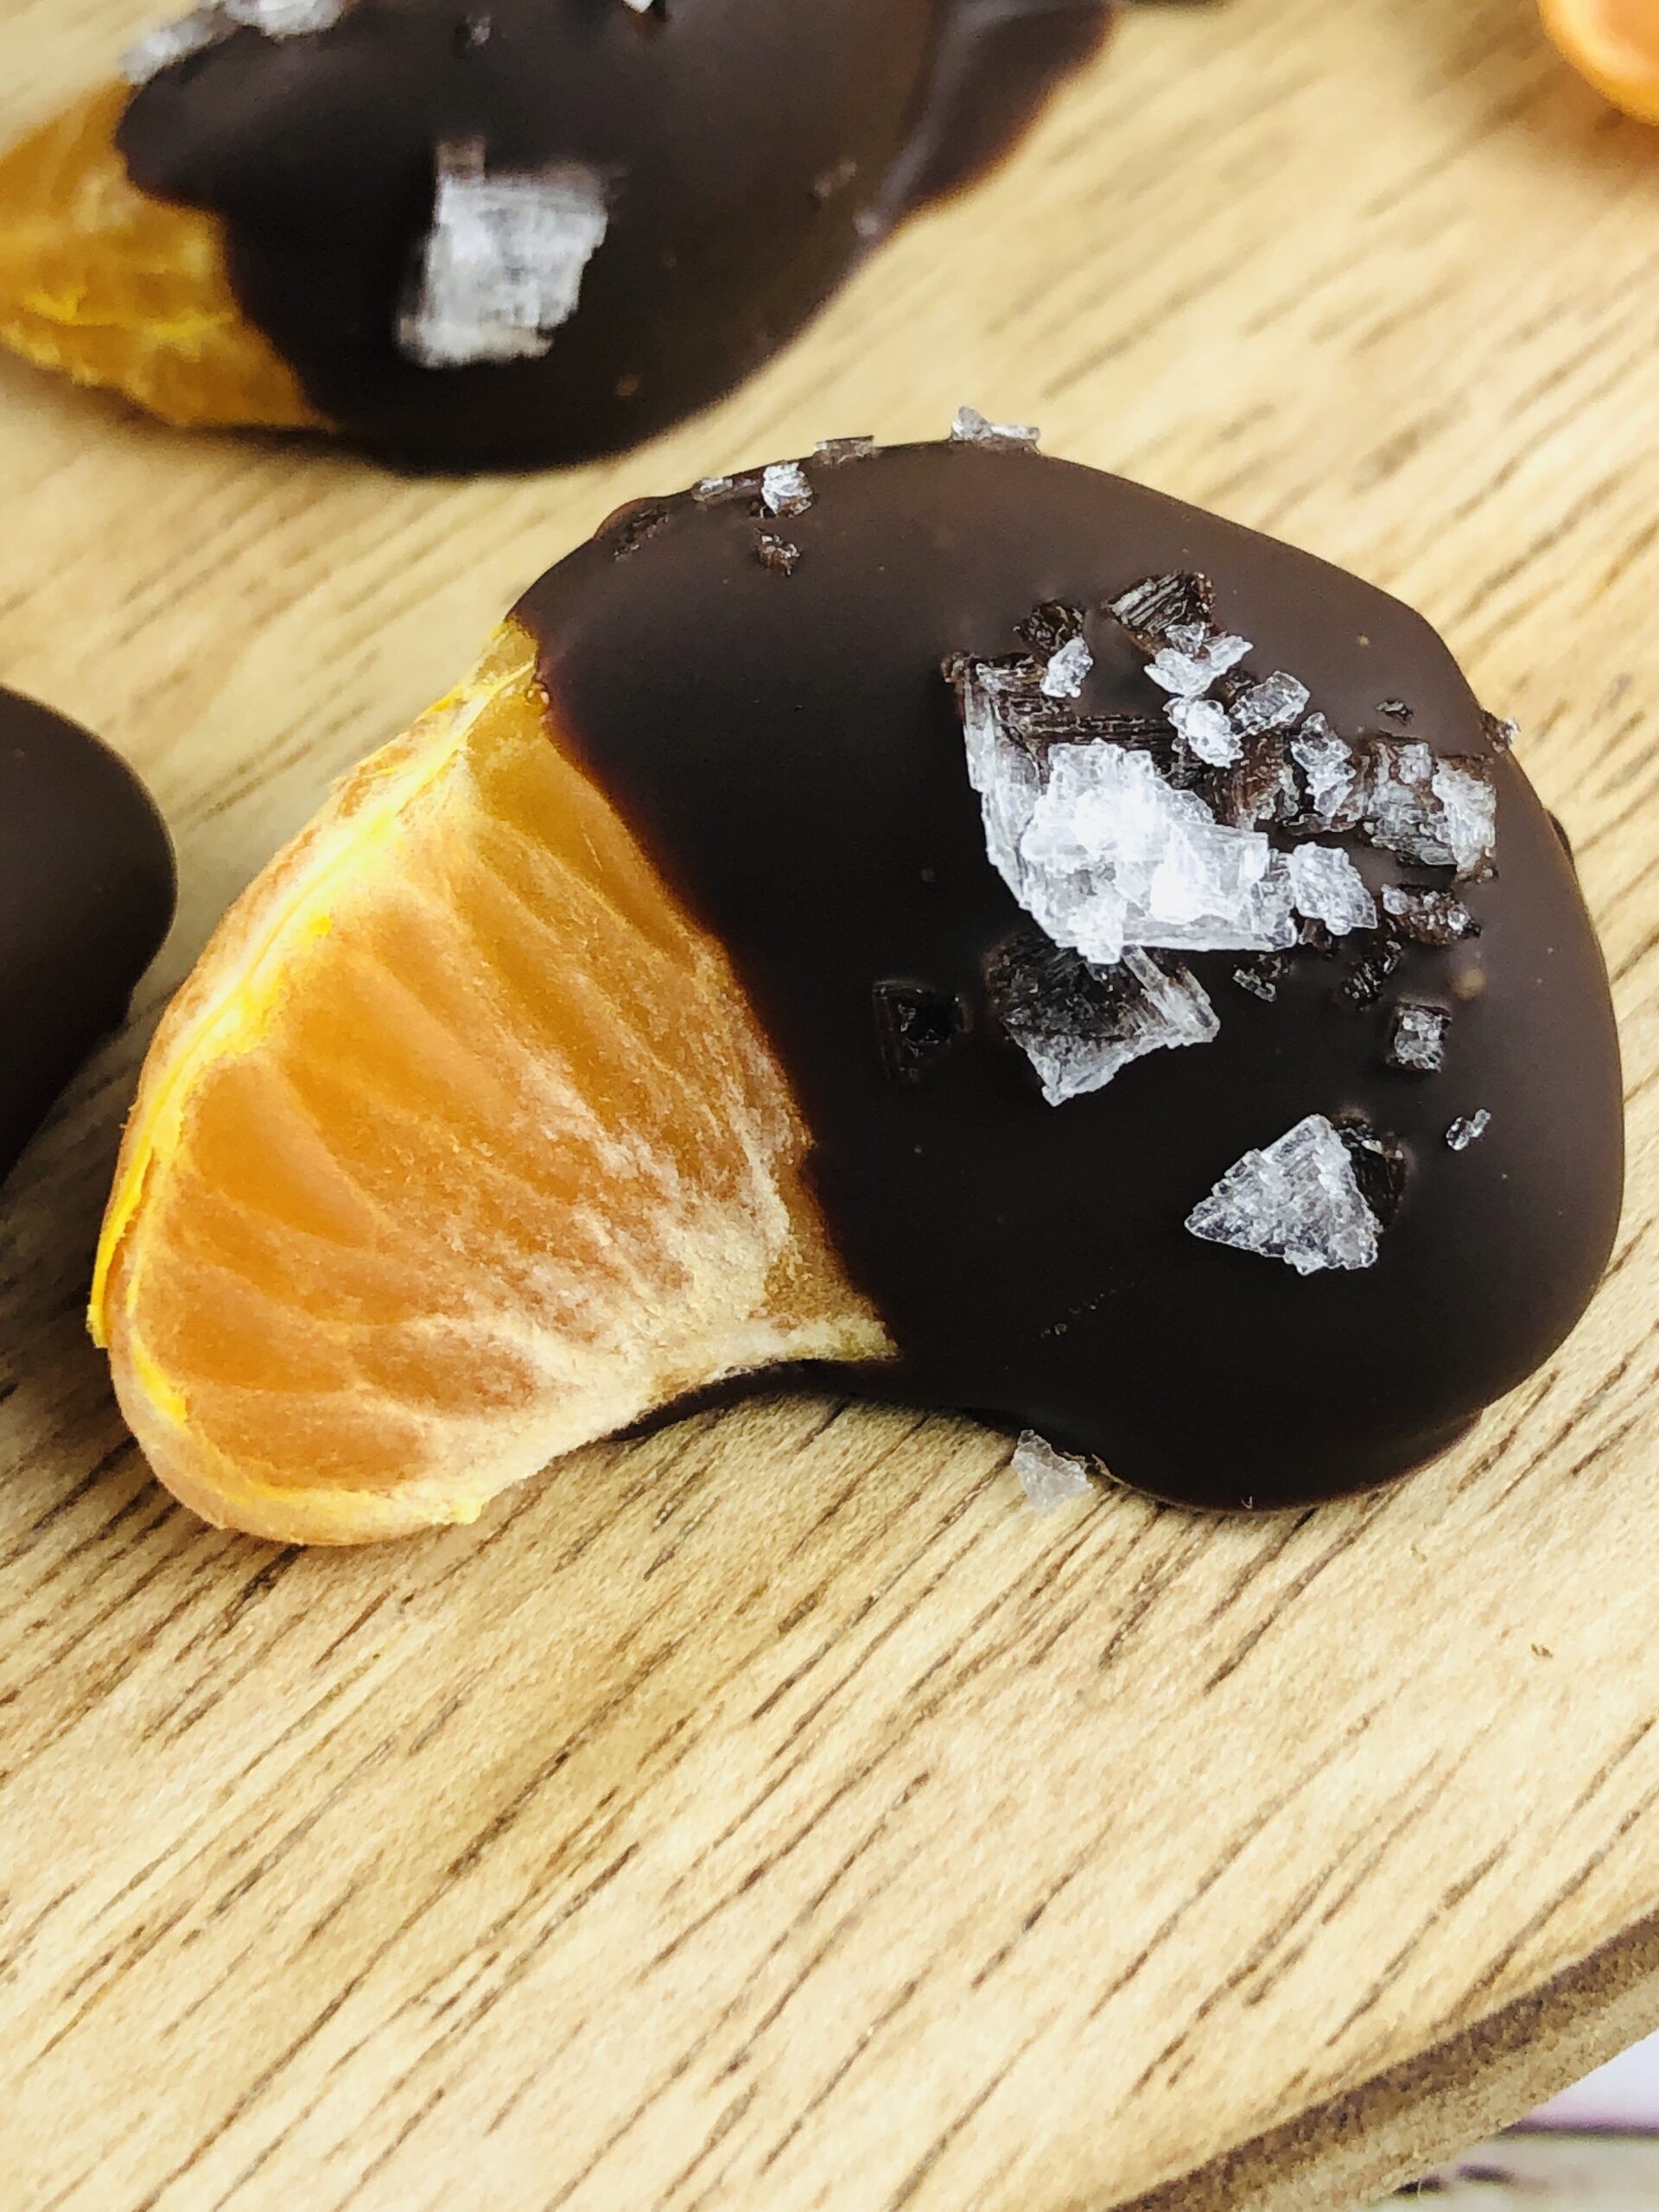 An orange covered in chocolate.